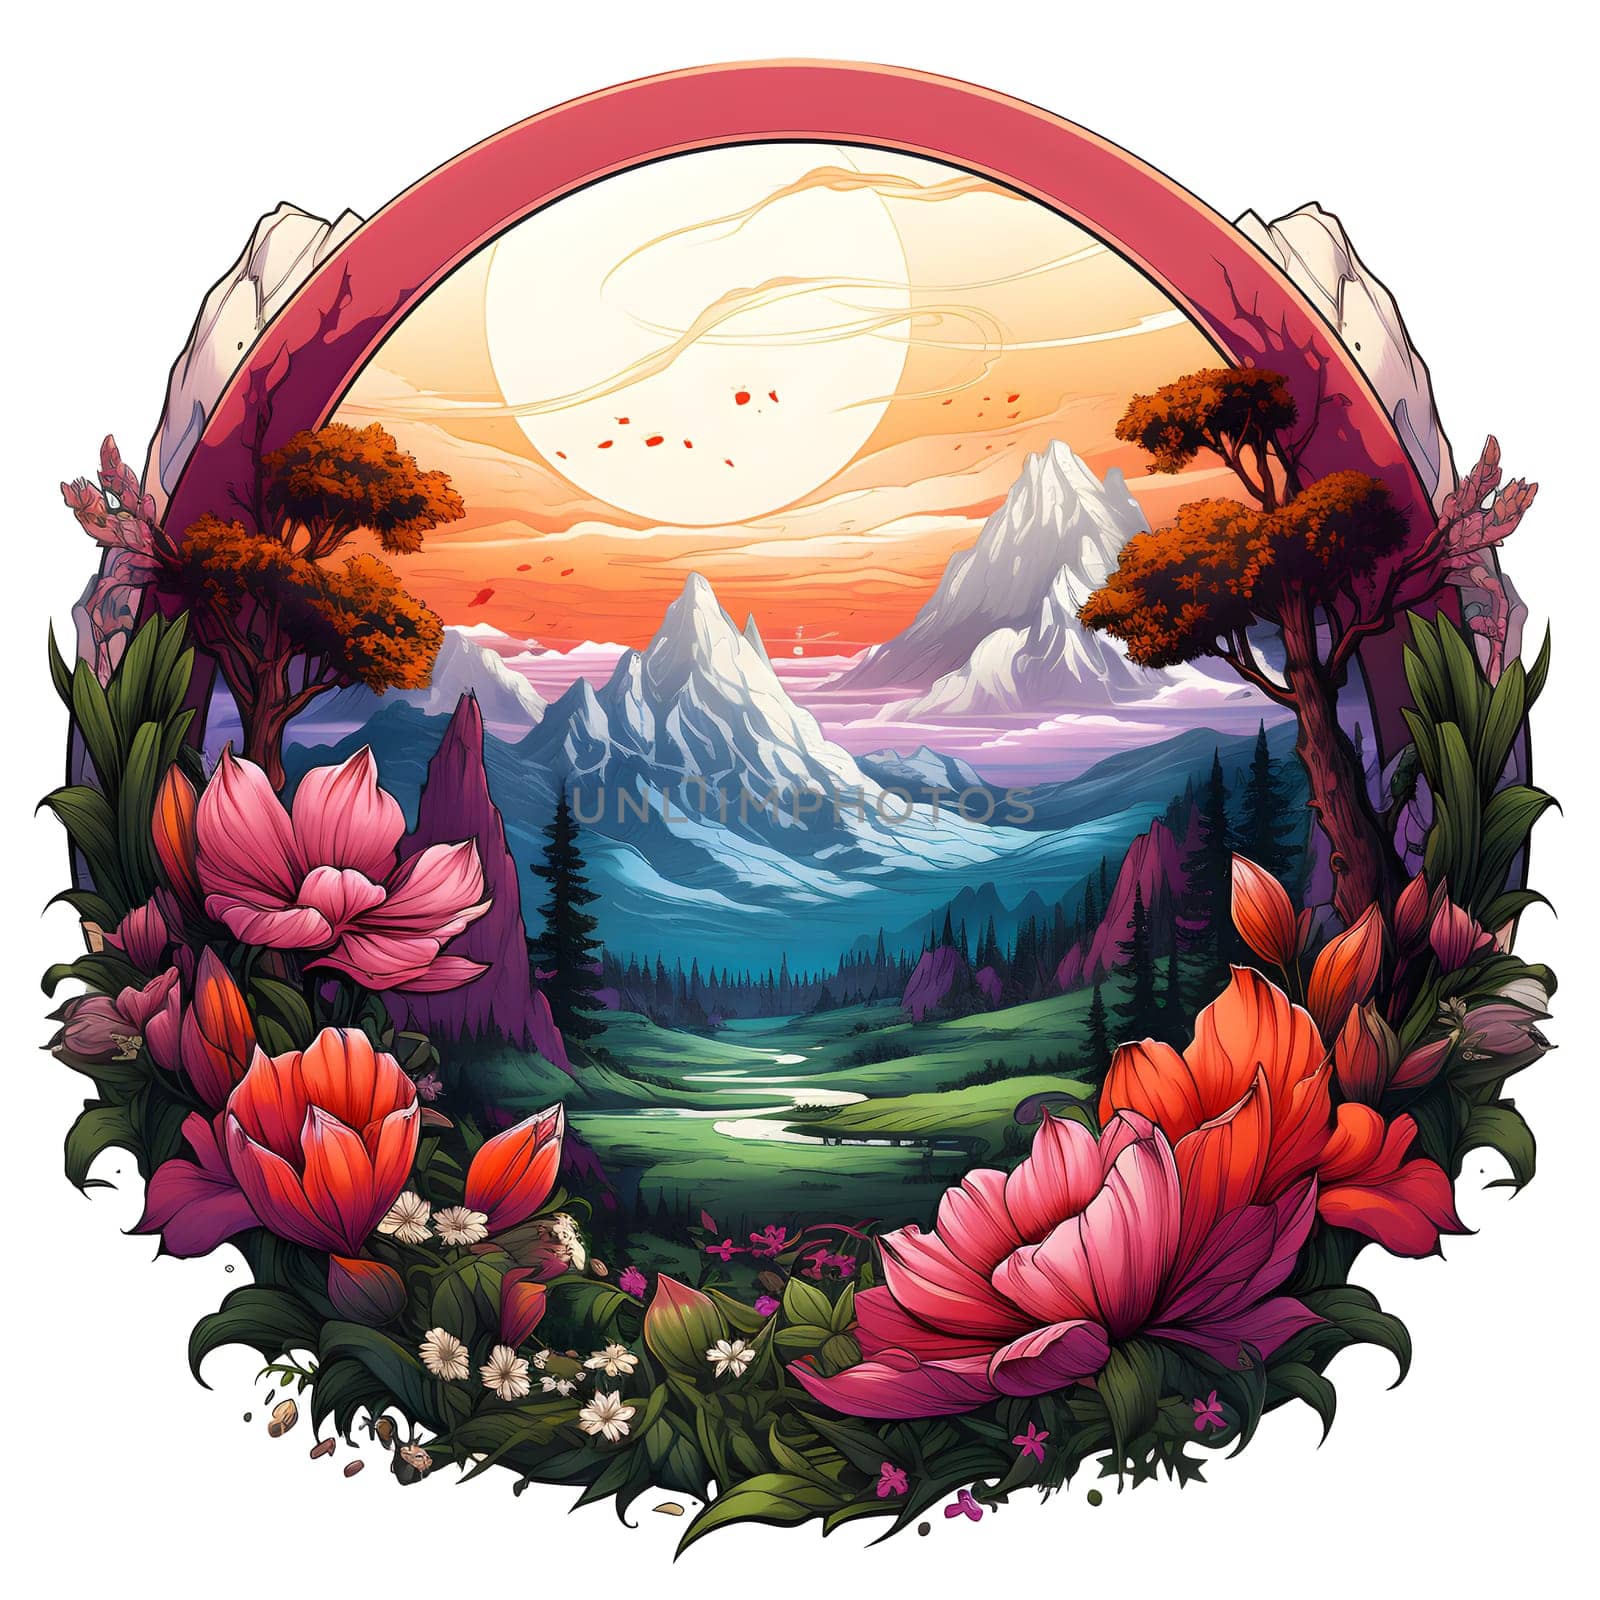 A stunning painting of a landscape with vibrant flowers and majestic mountains displayed beautifully in a picture frame